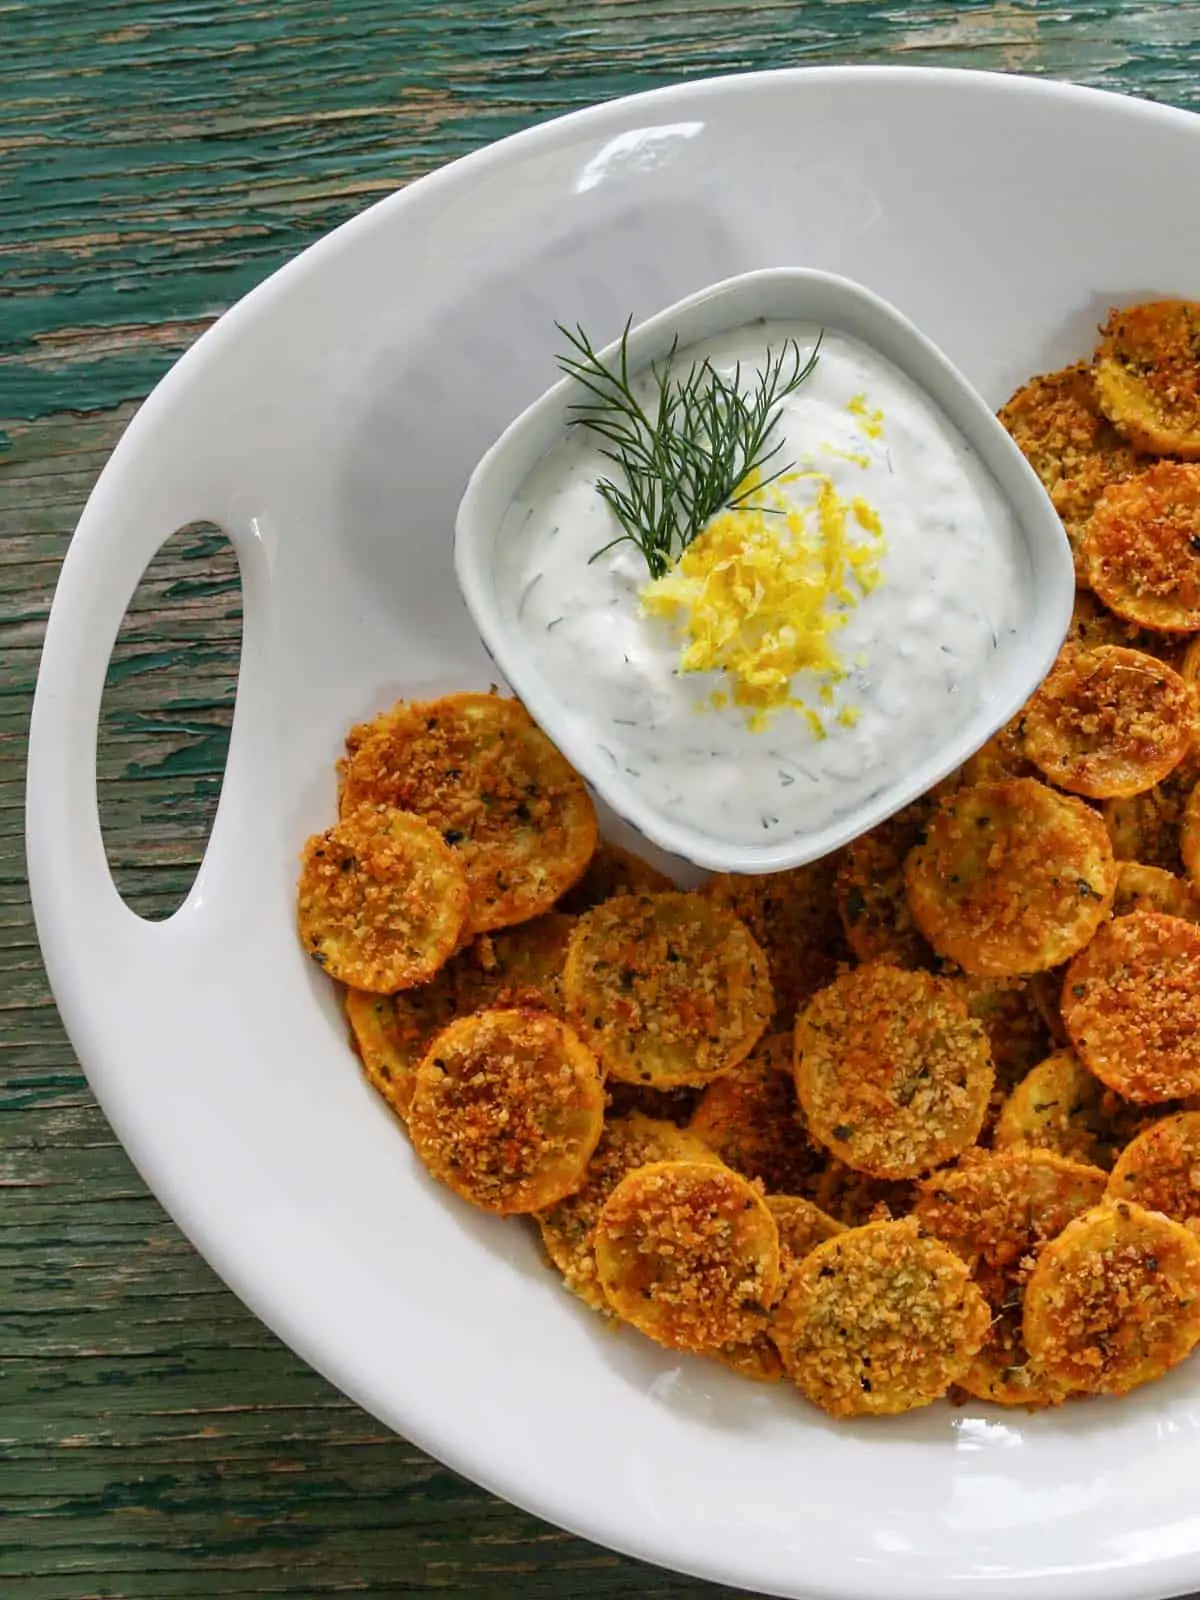 A large white platter with zucchini chips on it and a small bowl of yogurt dip garnished with lemon and dill.